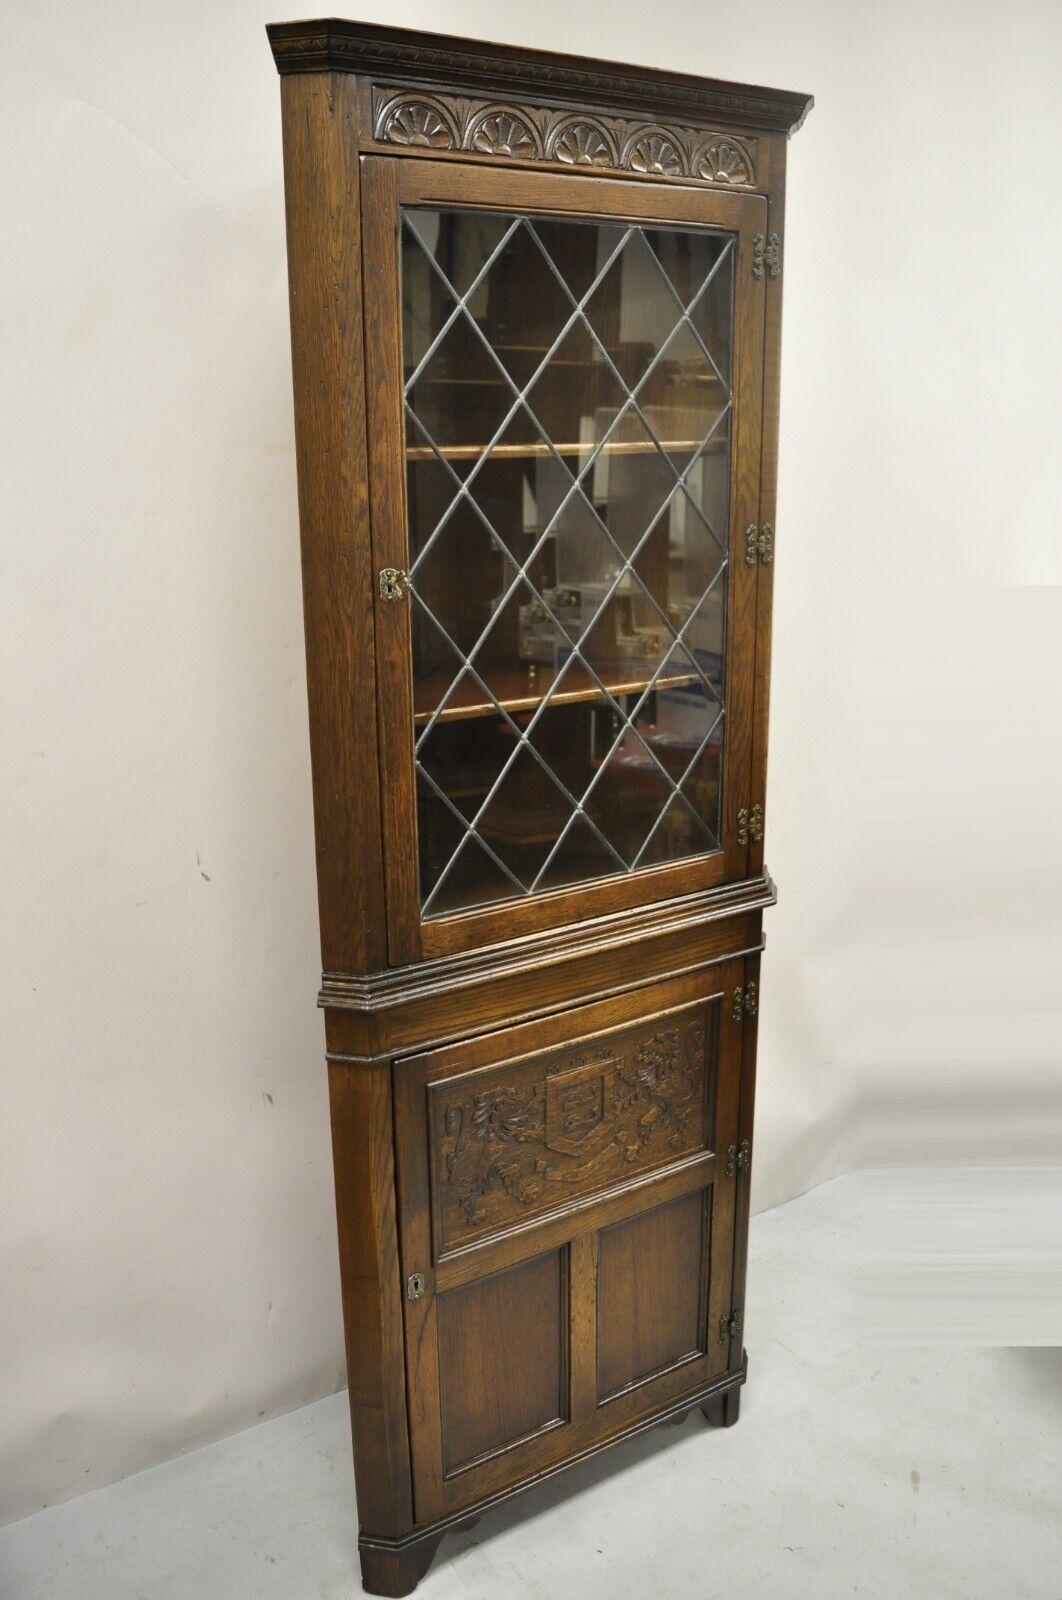 Ethan Allen England Royal Charter oak Sussex Jacobean Curio corner cabinet. Item features leaded glass door, carved door panel with lions and shield, solid wood construction, beautiful wood grain, distressed finish, nicely carved details, 2 swing